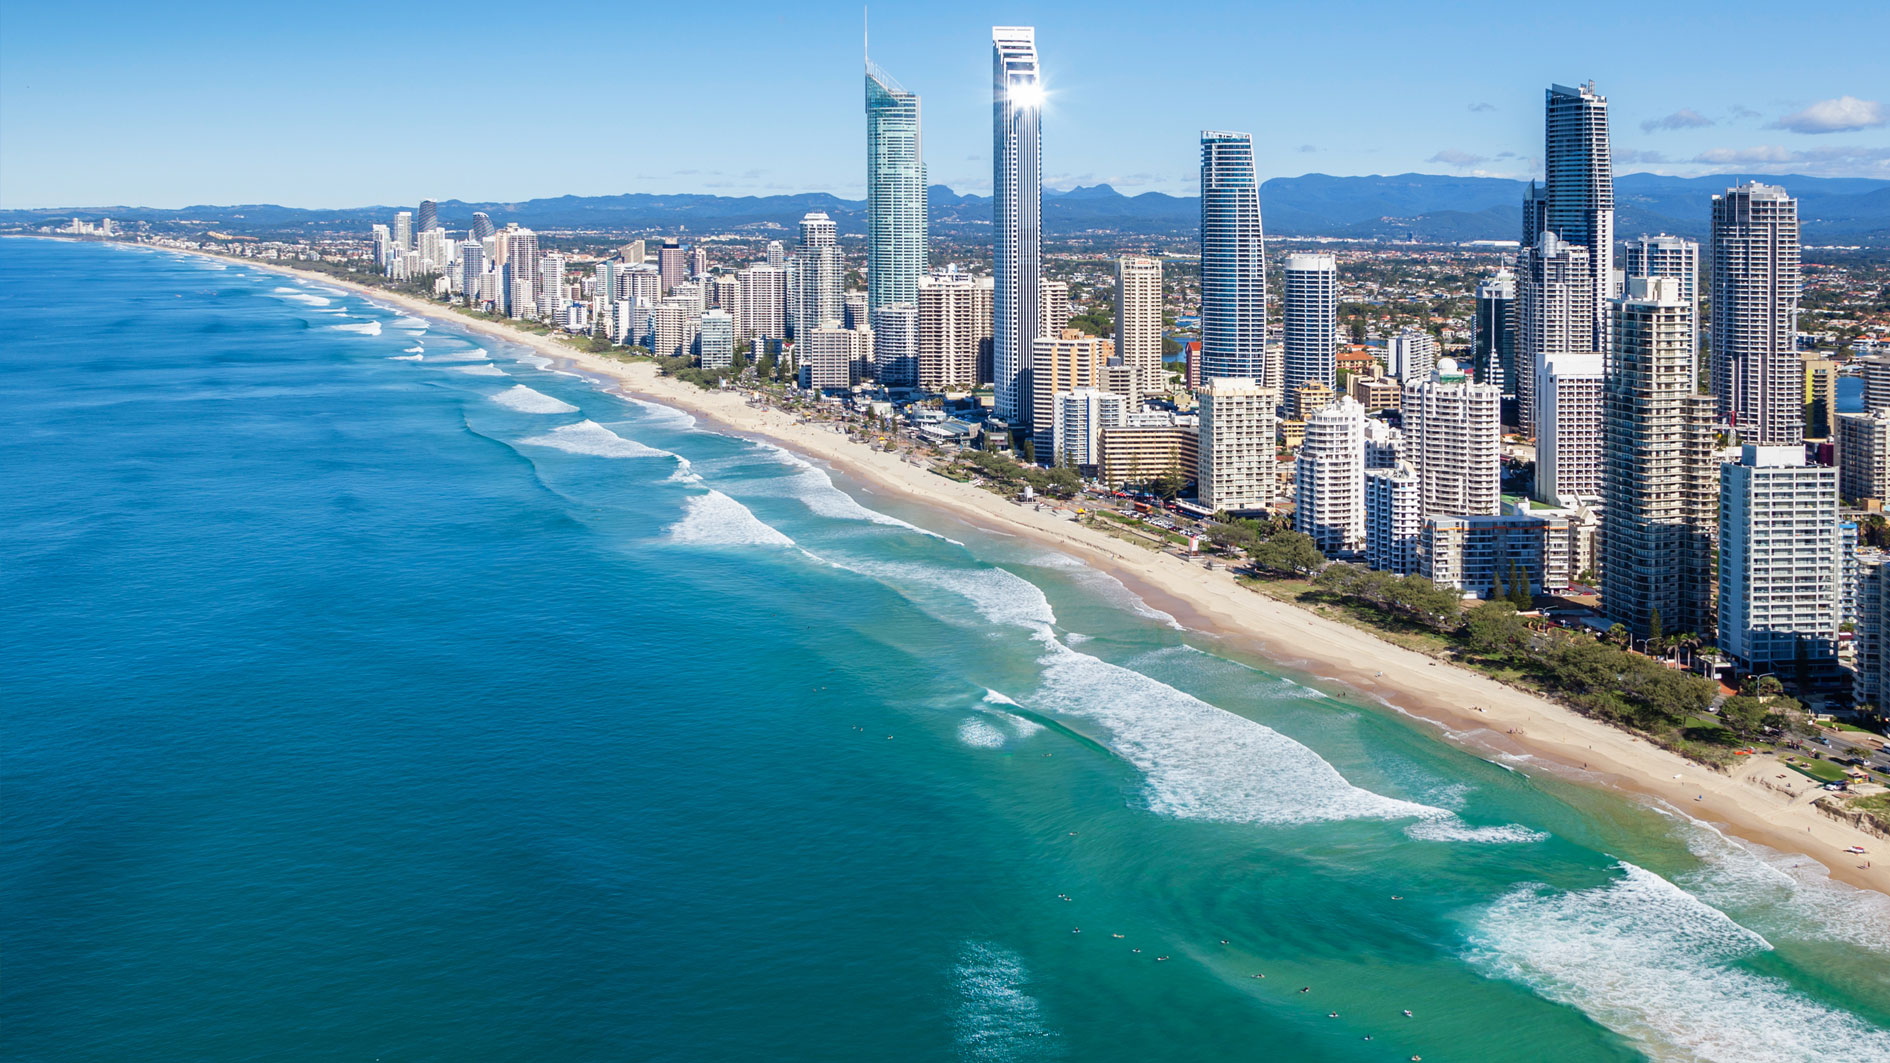 Gold Coast Surfer's Paradise beach on sunny day, Queensland